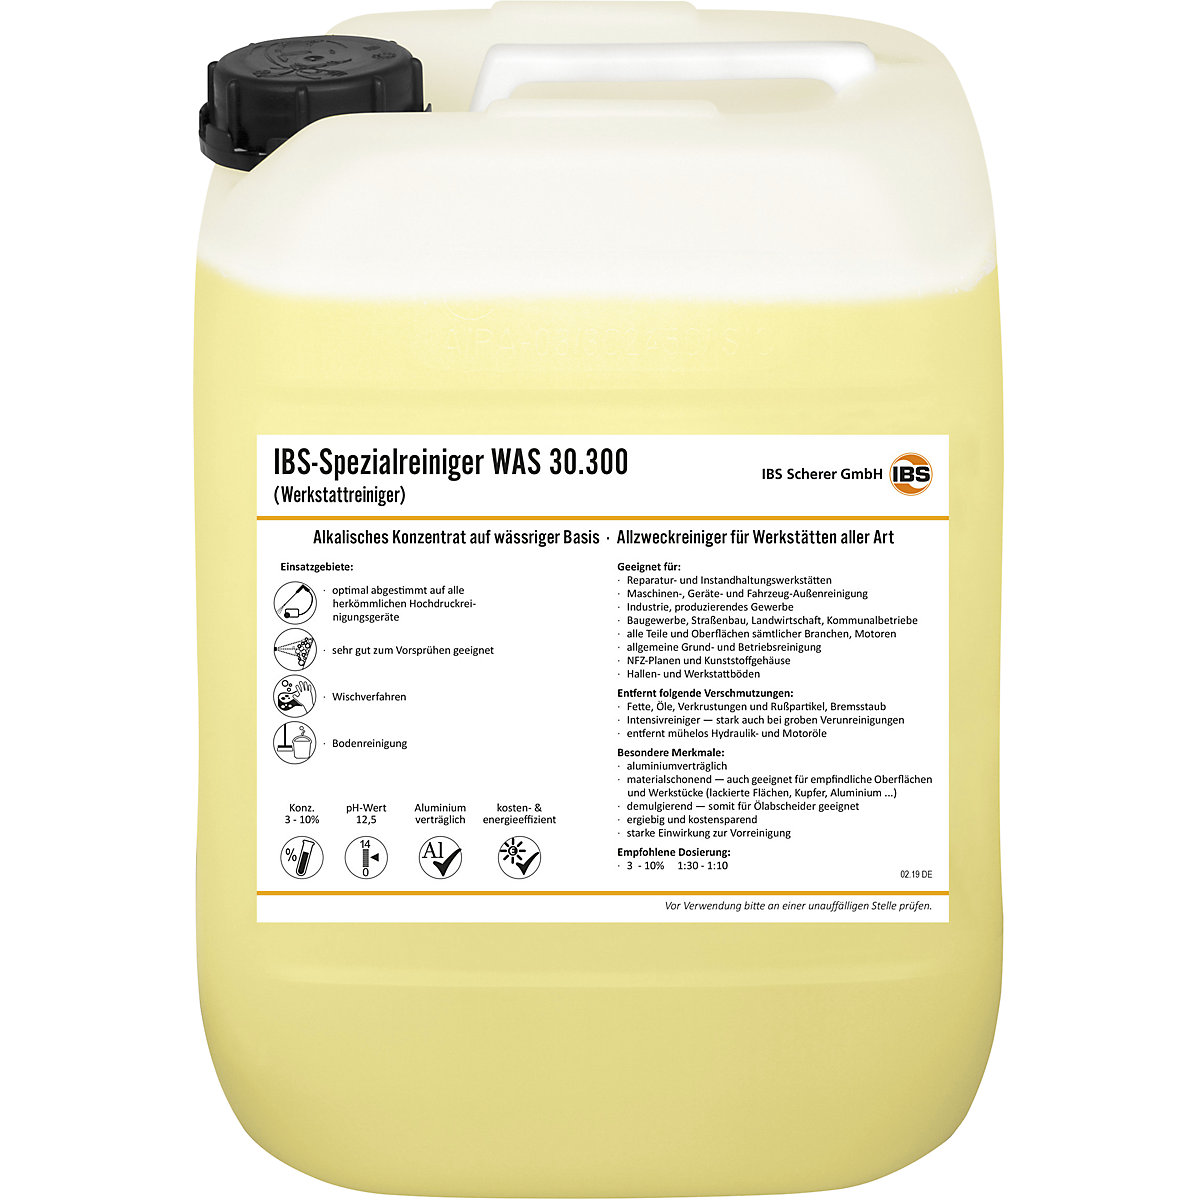 All-purpose cleaner for the workshop - IBS Scherer